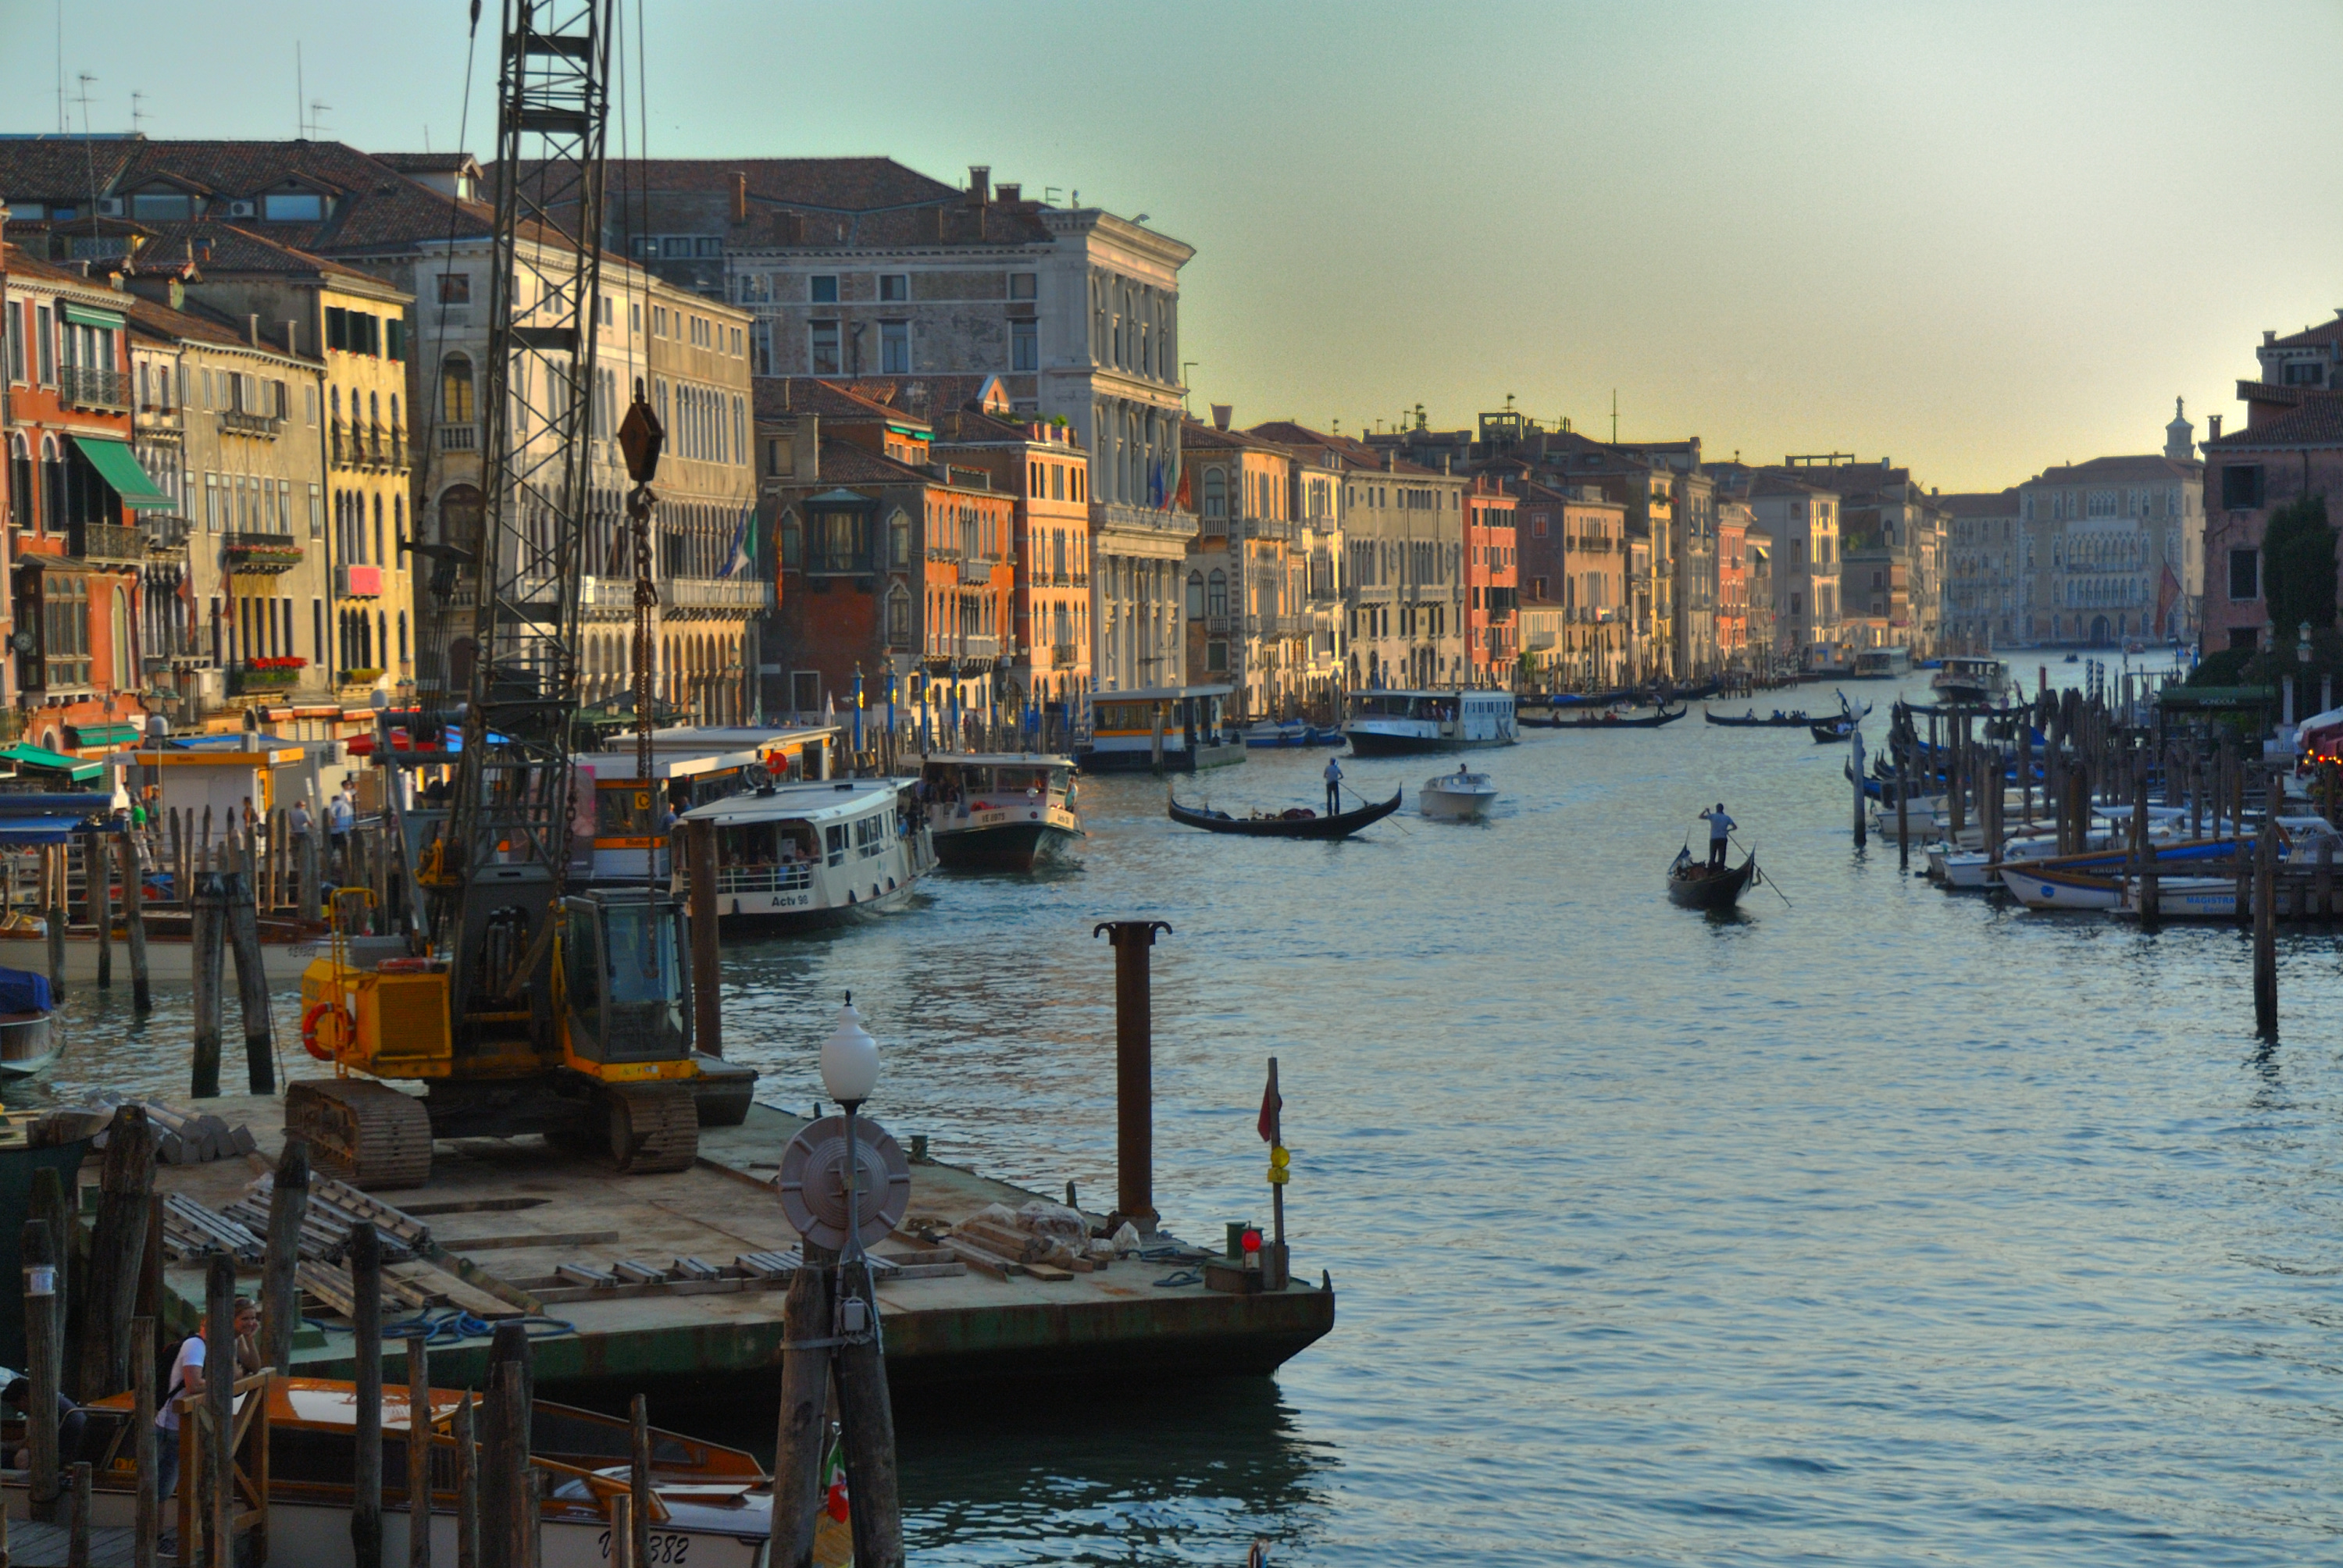 A picturesque view of the Grand Canal from the Vaporetto